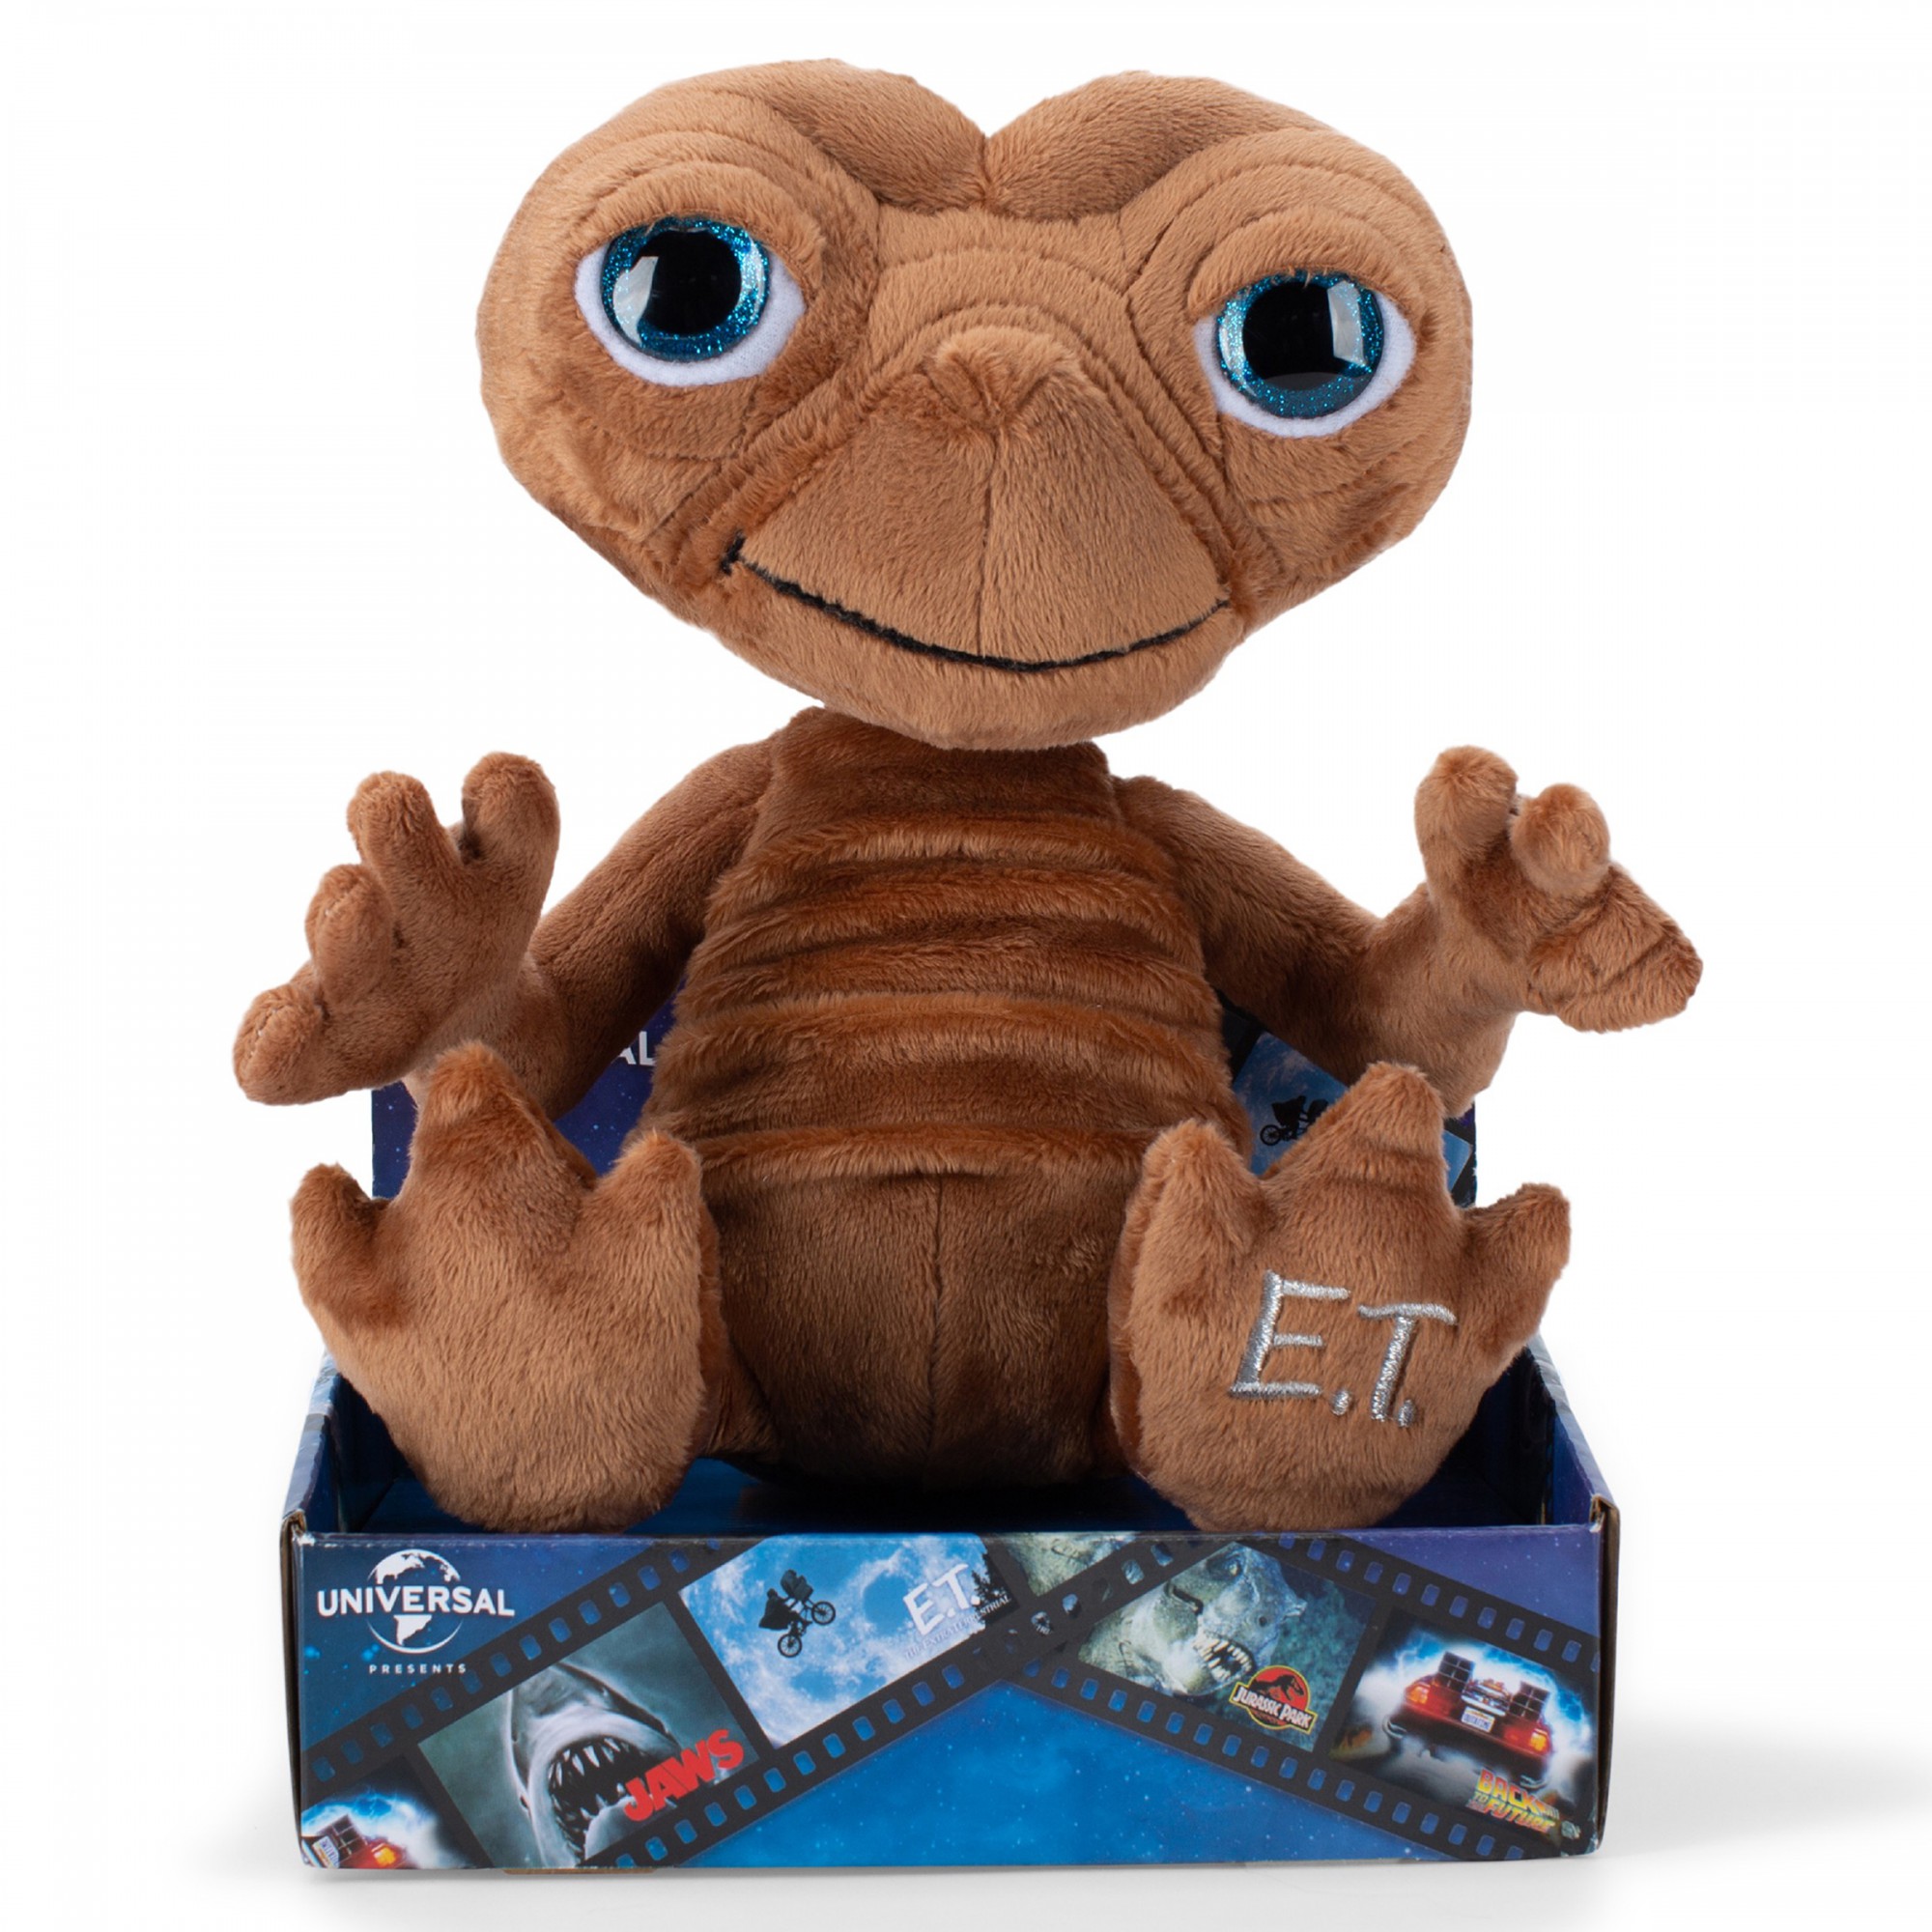 E.T 10 Soft Toy at Toys R Us UK